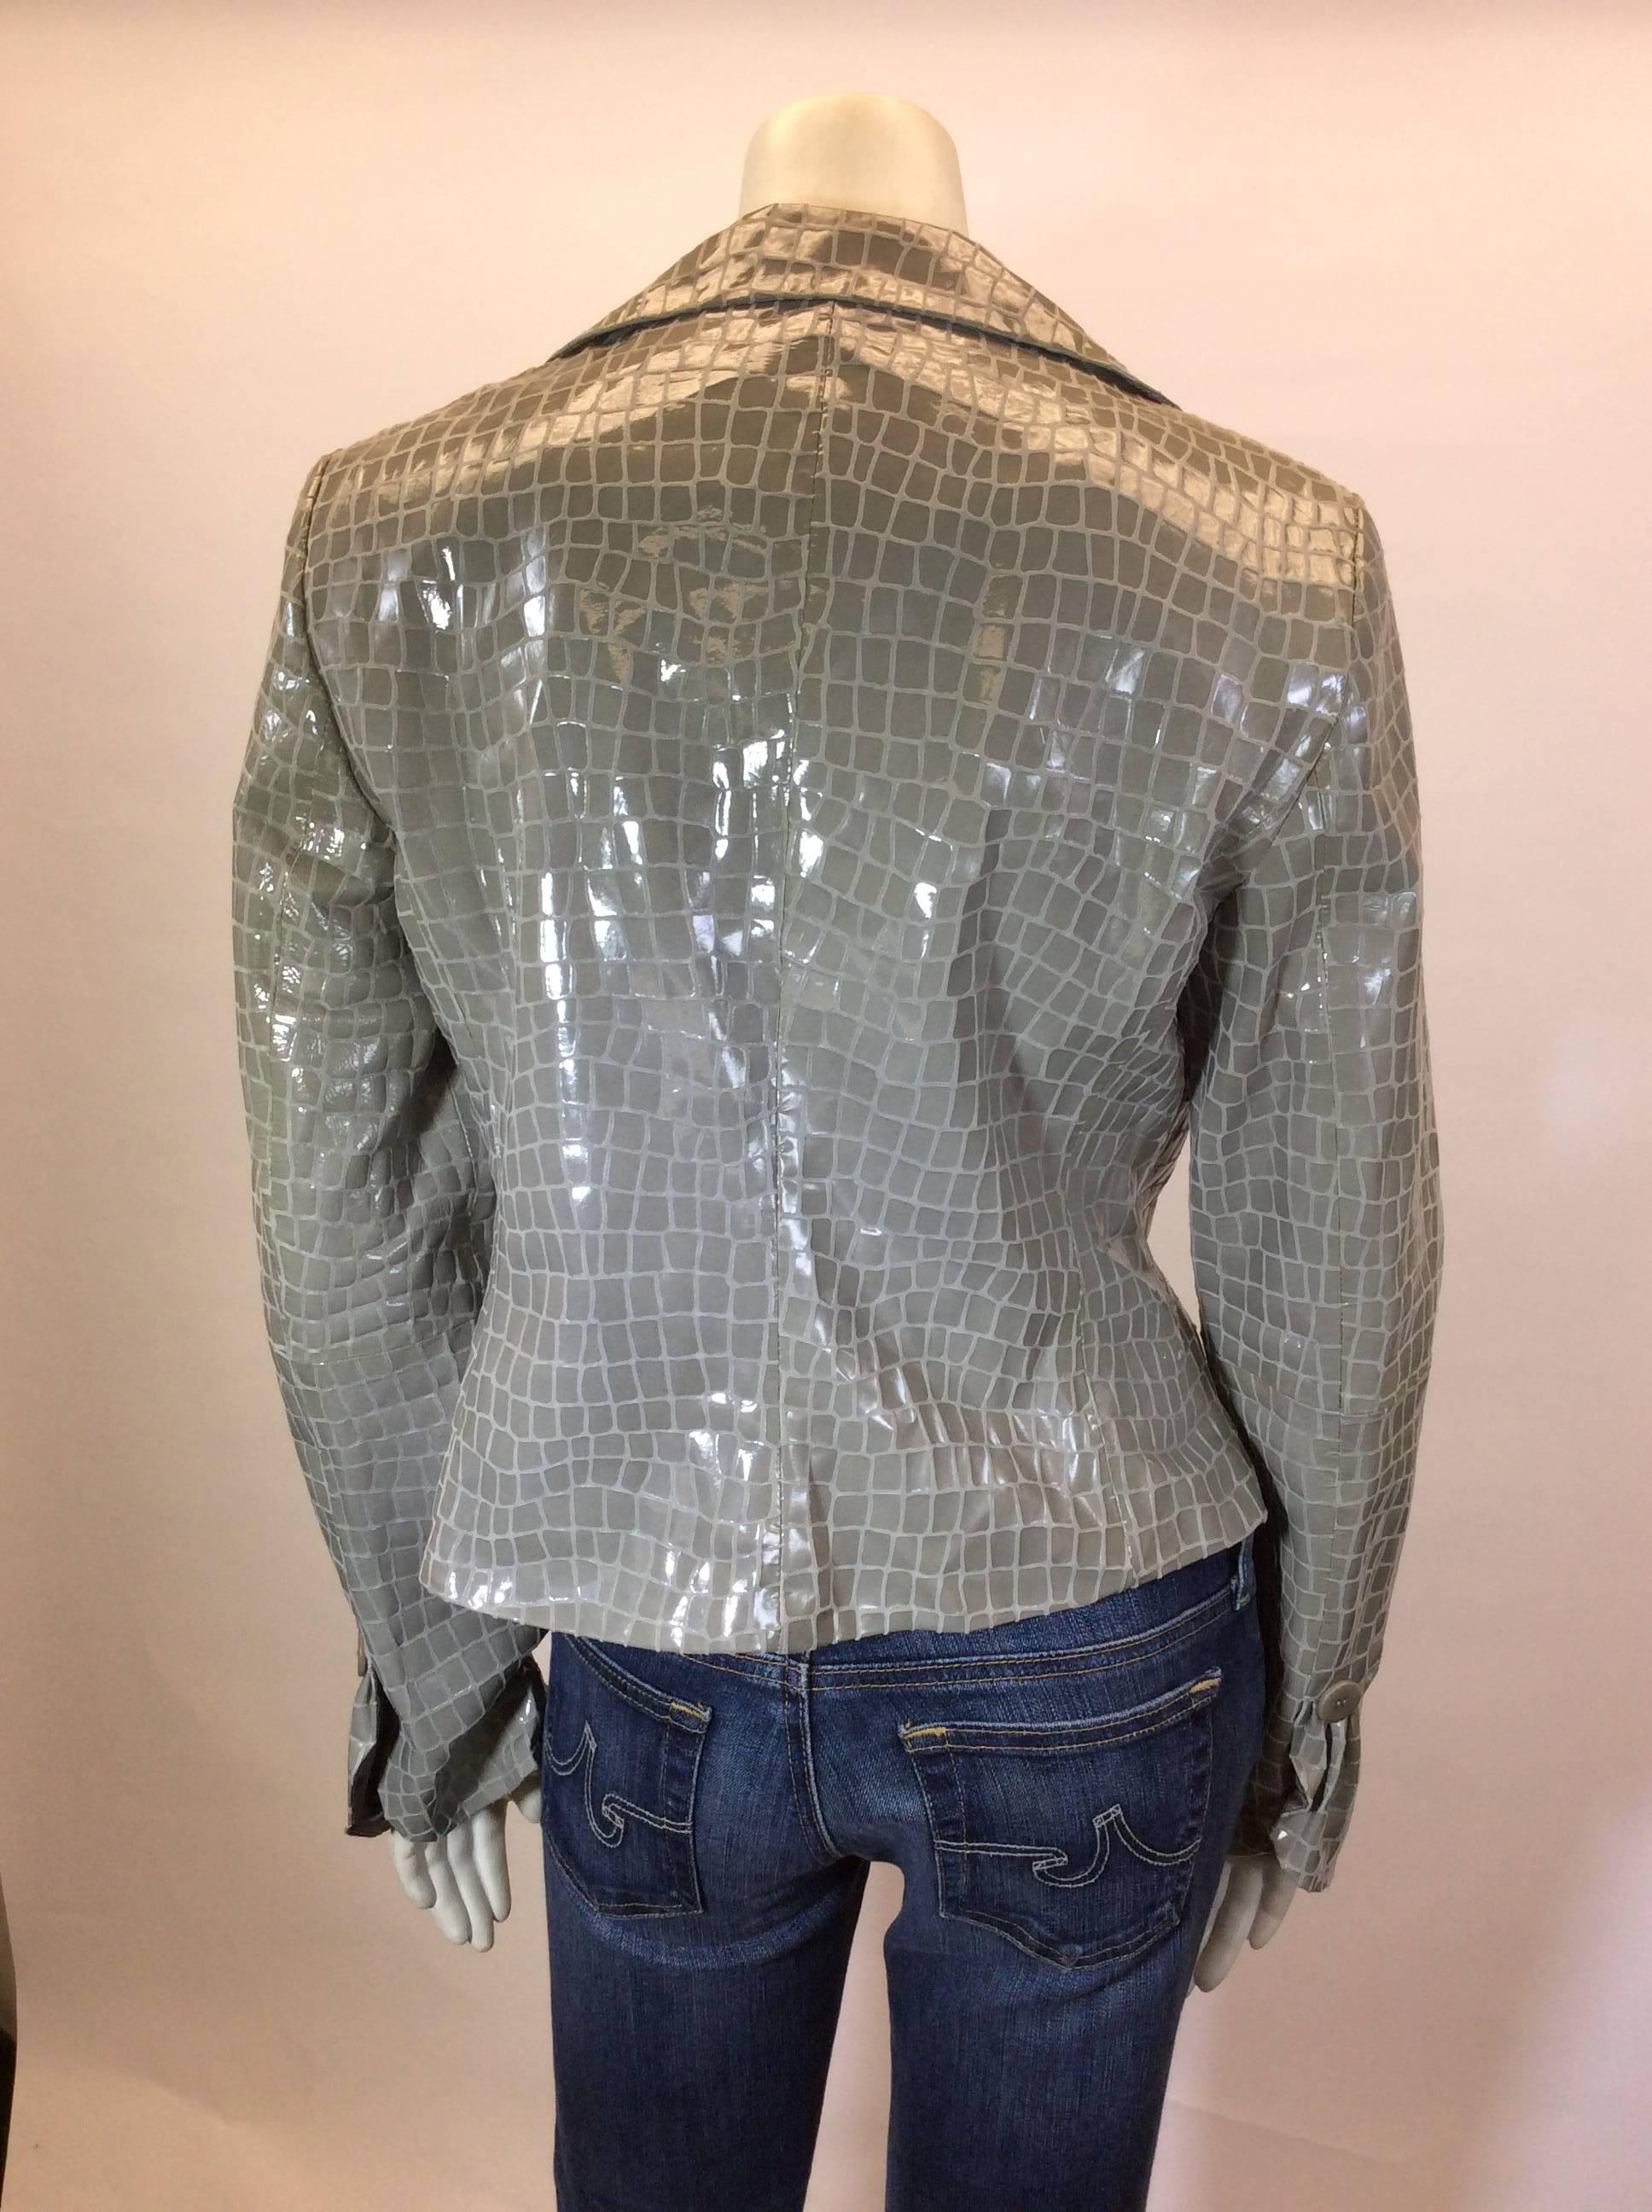 Armani Grey Patent Croc Detail White Label Blazer In Excellent Condition For Sale In Narberth, PA